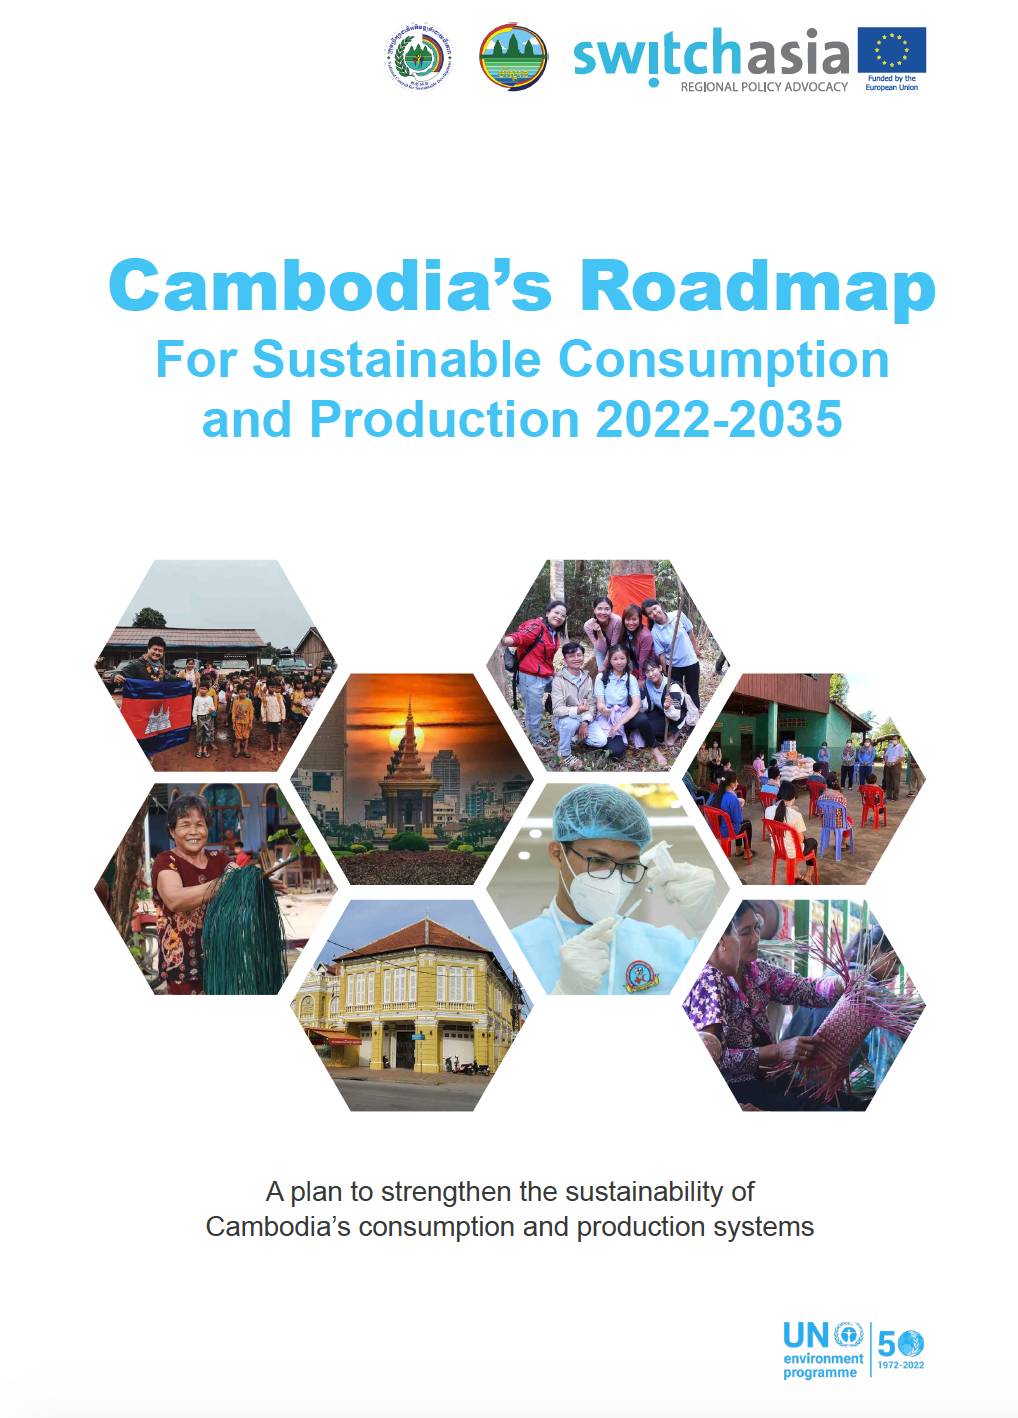 Cambodia’s Roadmap for Sustainable Consumption and Production 2022-2035